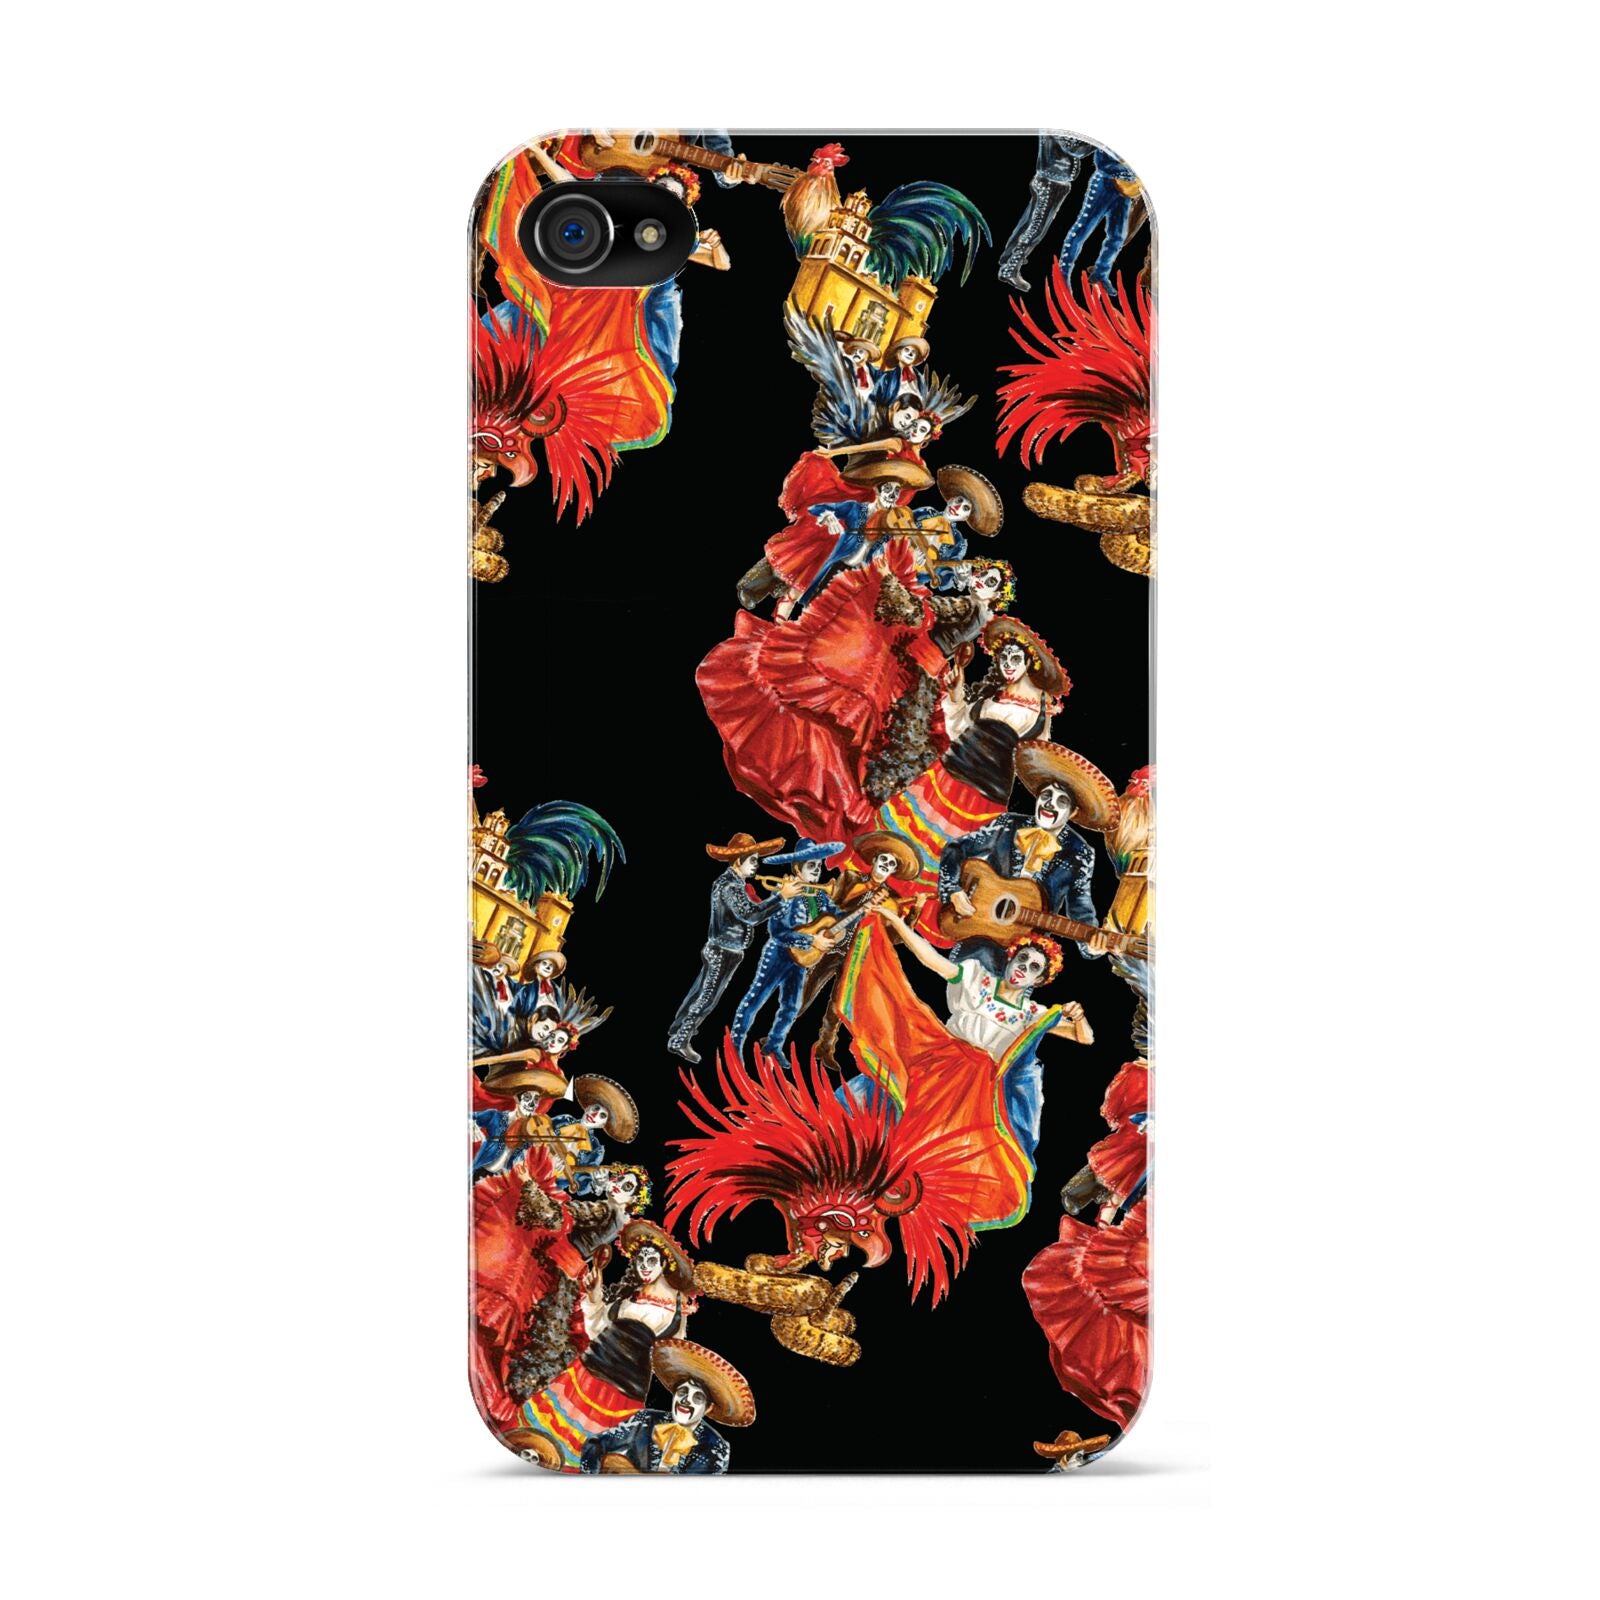 Day of the Dead Festival Apple iPhone 4s Case